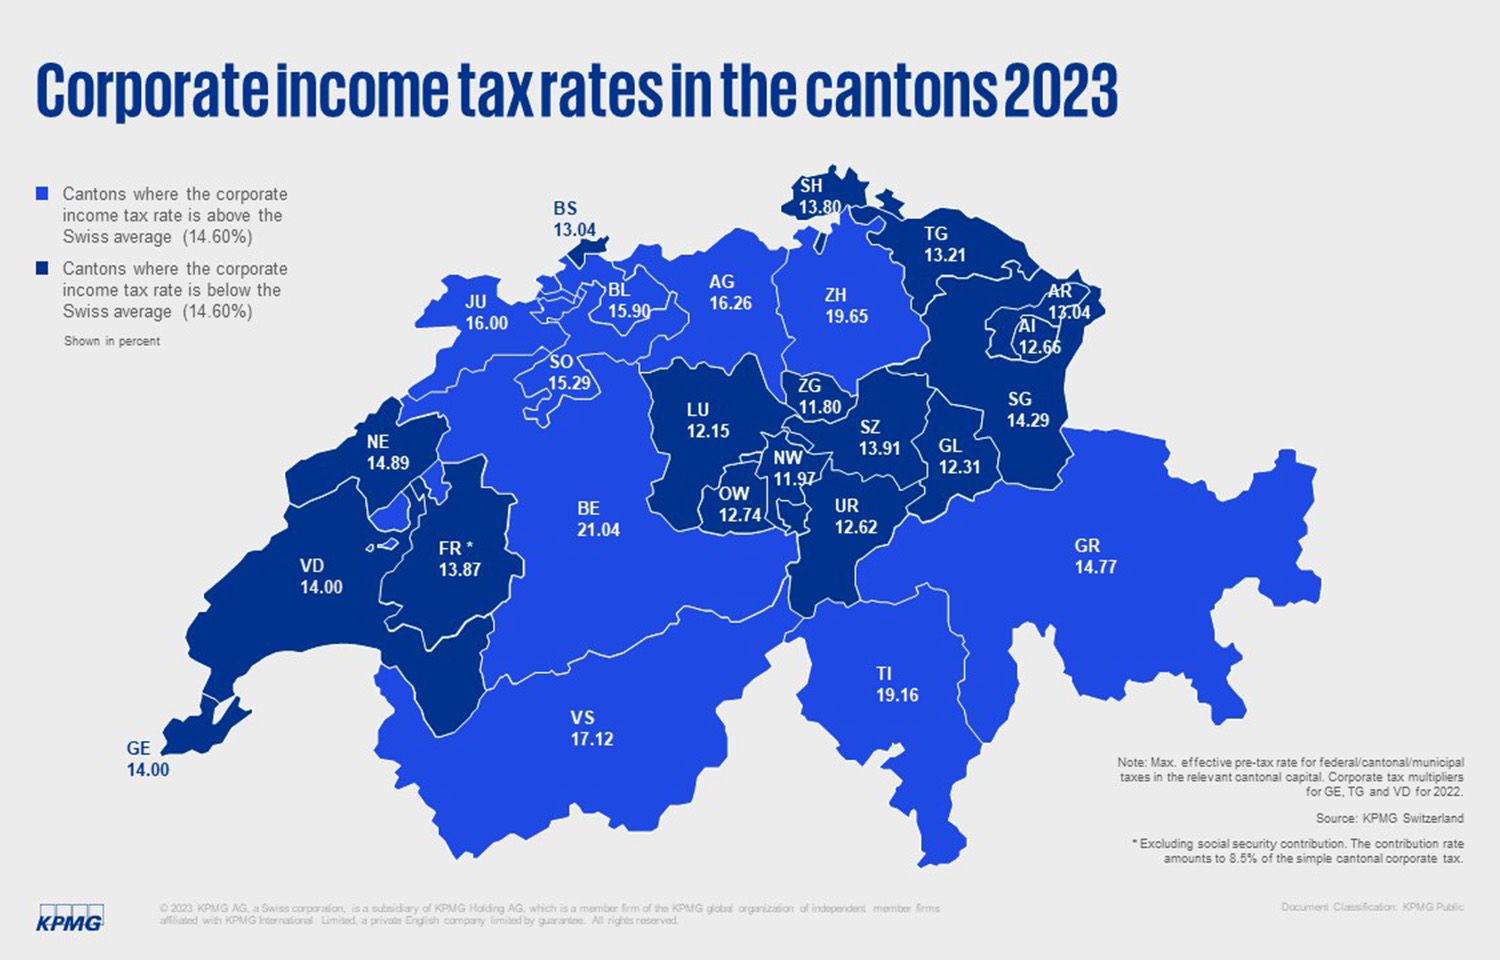 Corporate tax rates in the cantons in 2023